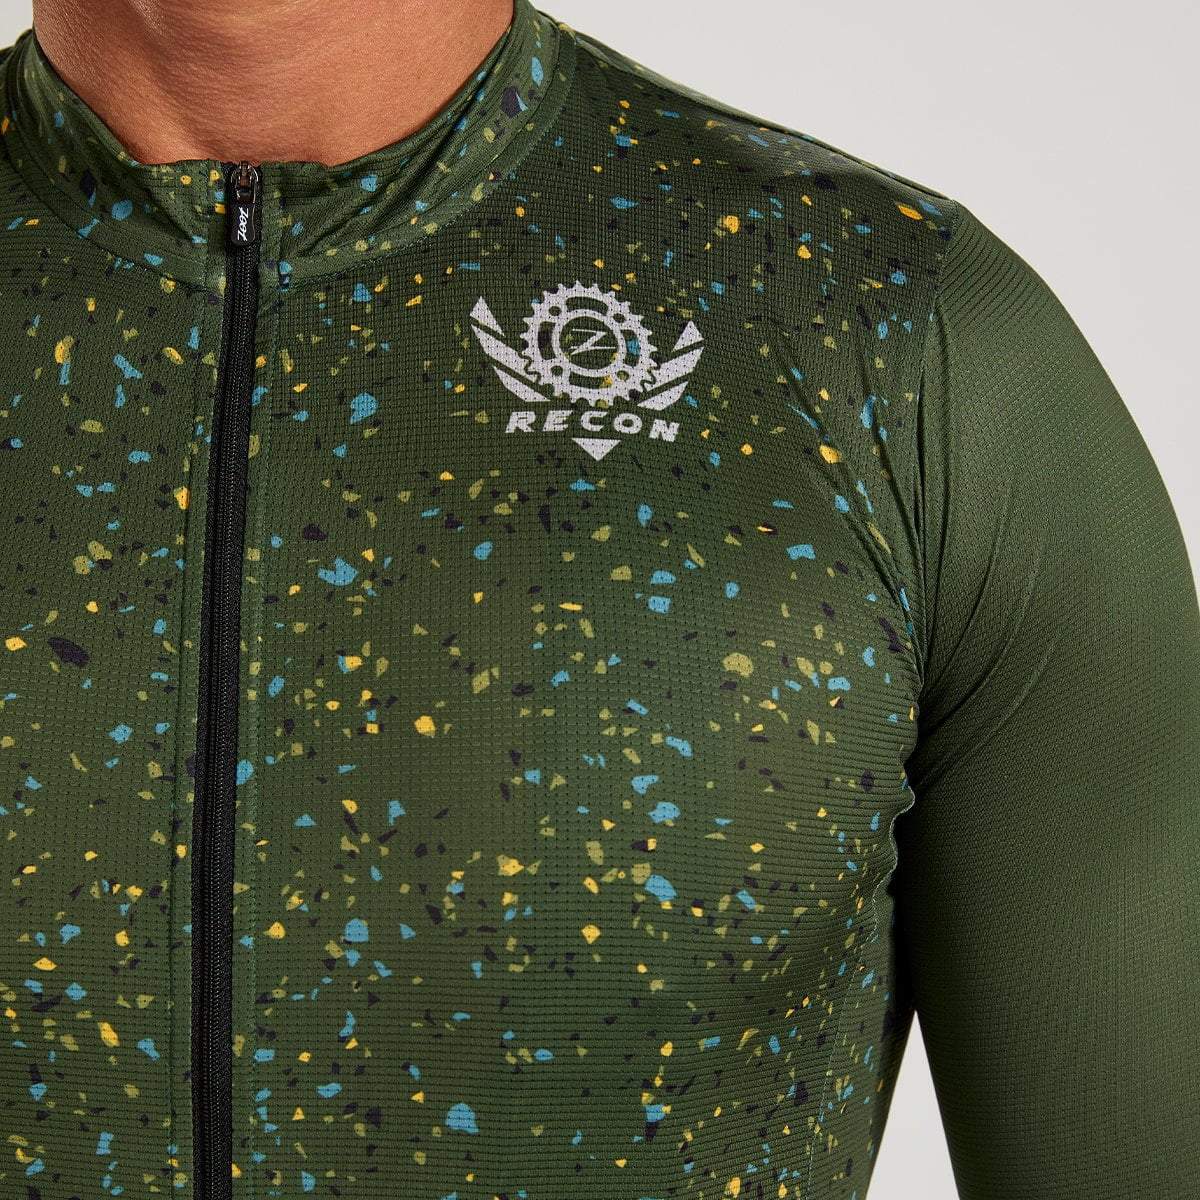 Zoot Sports CYCLE APPAREL MENS RECON CYCLE JERSEY - SPRUCE